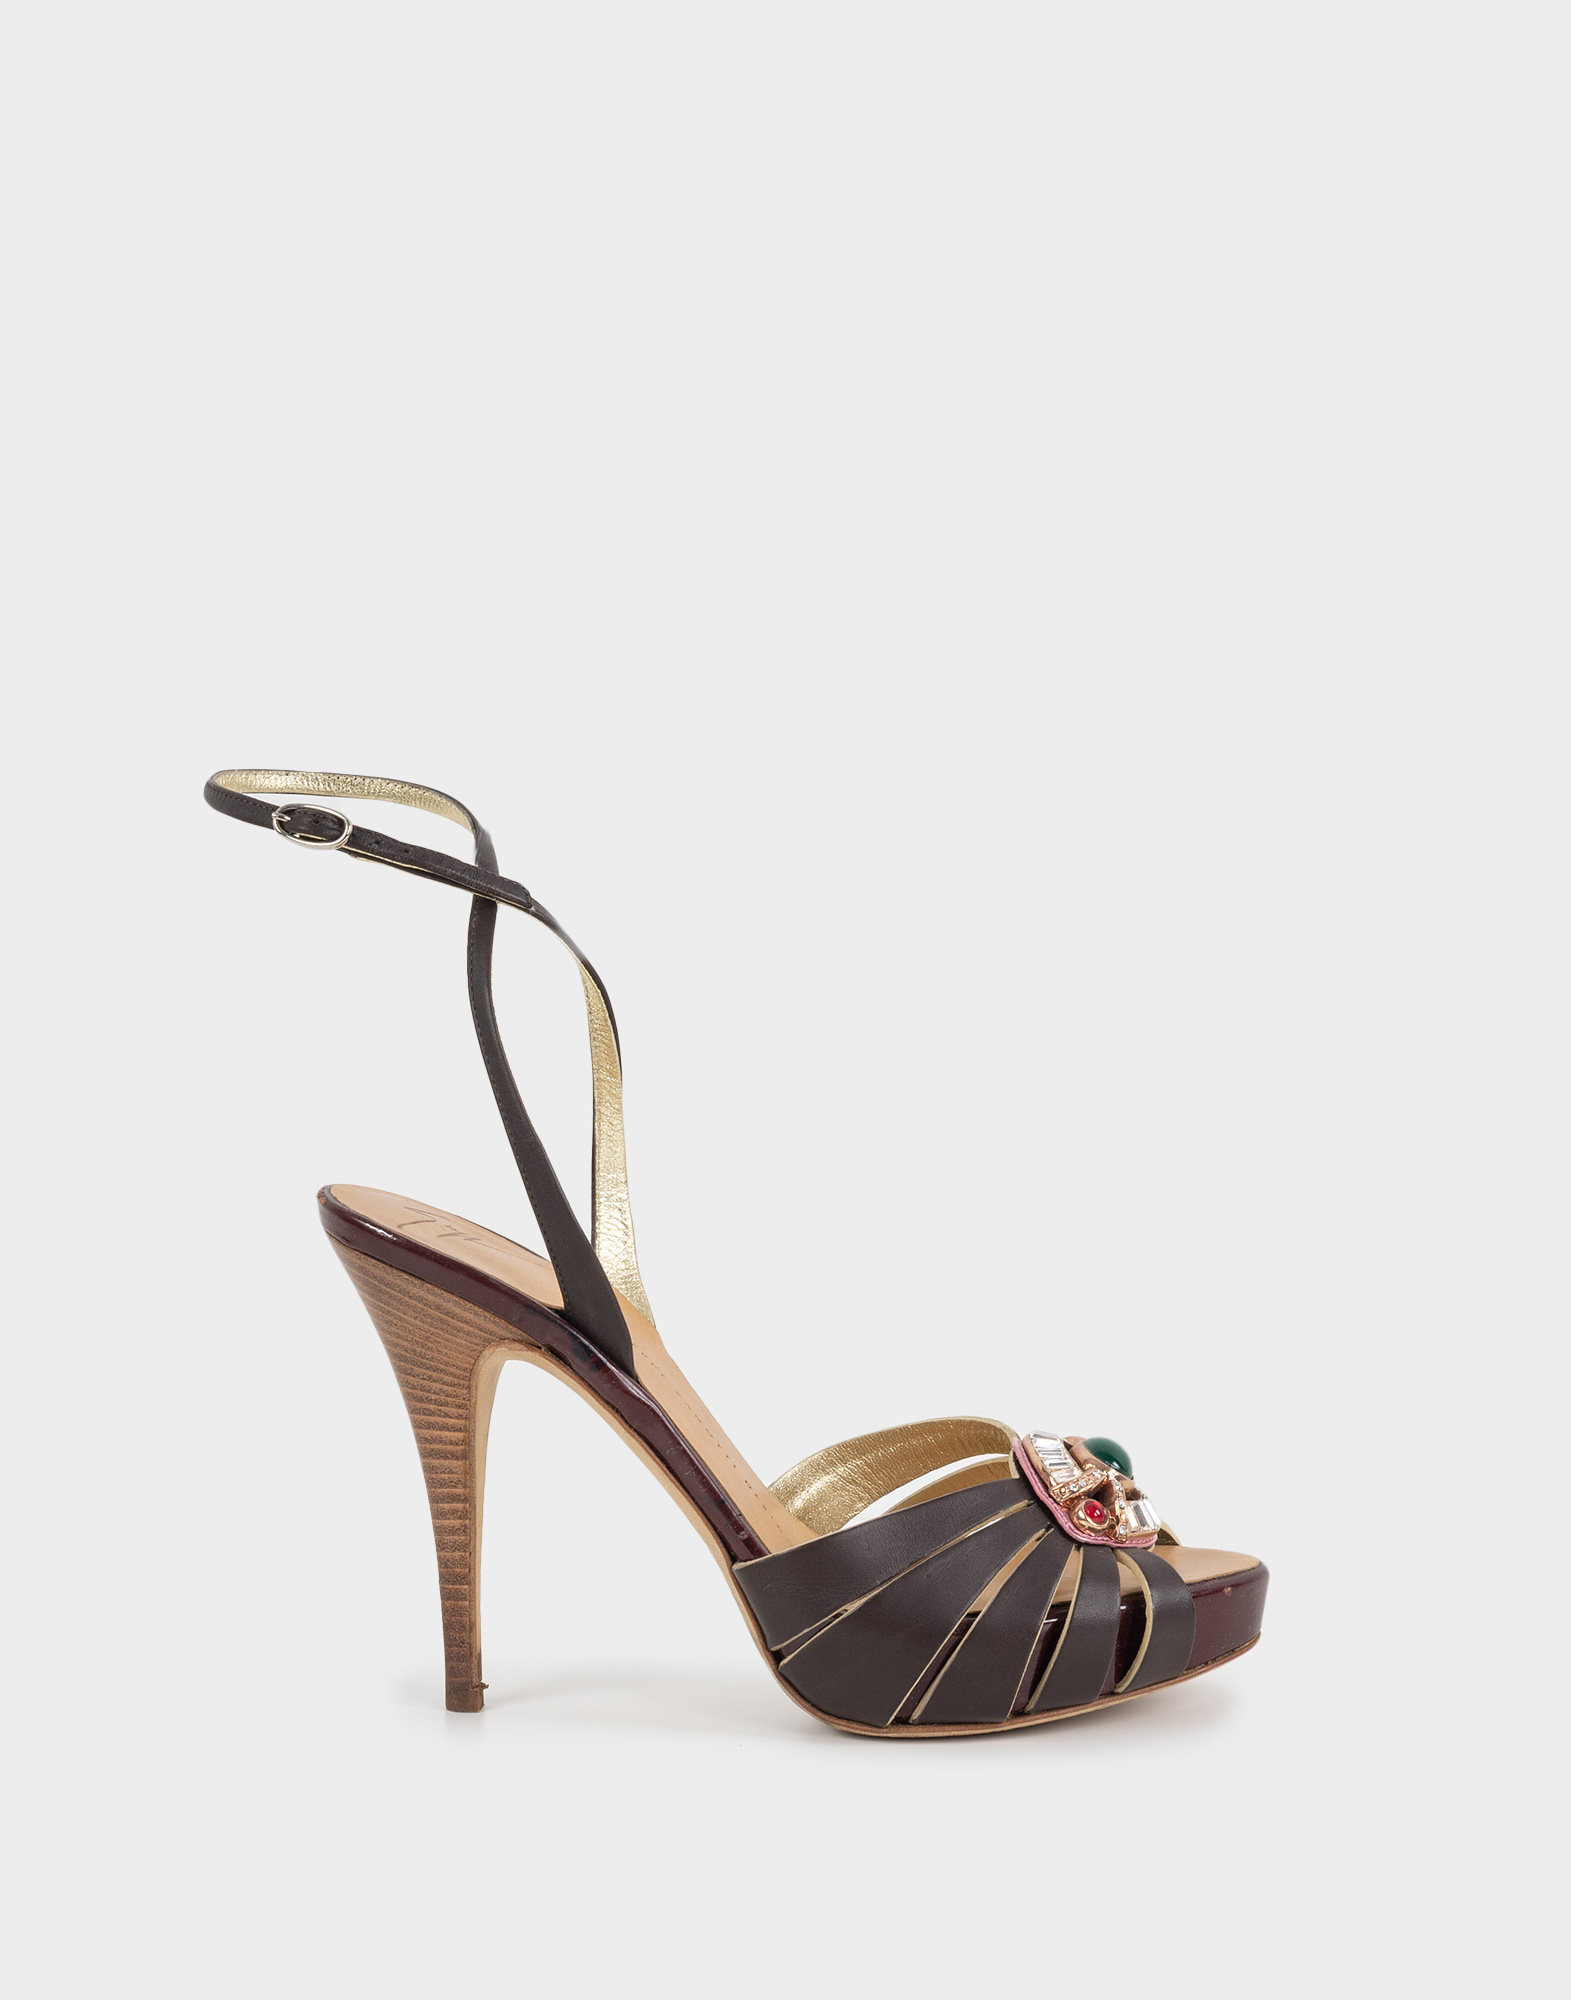 Brown leather women's sandals with ankle strap, thin stiletto heel, and colored stone applied on the toe.